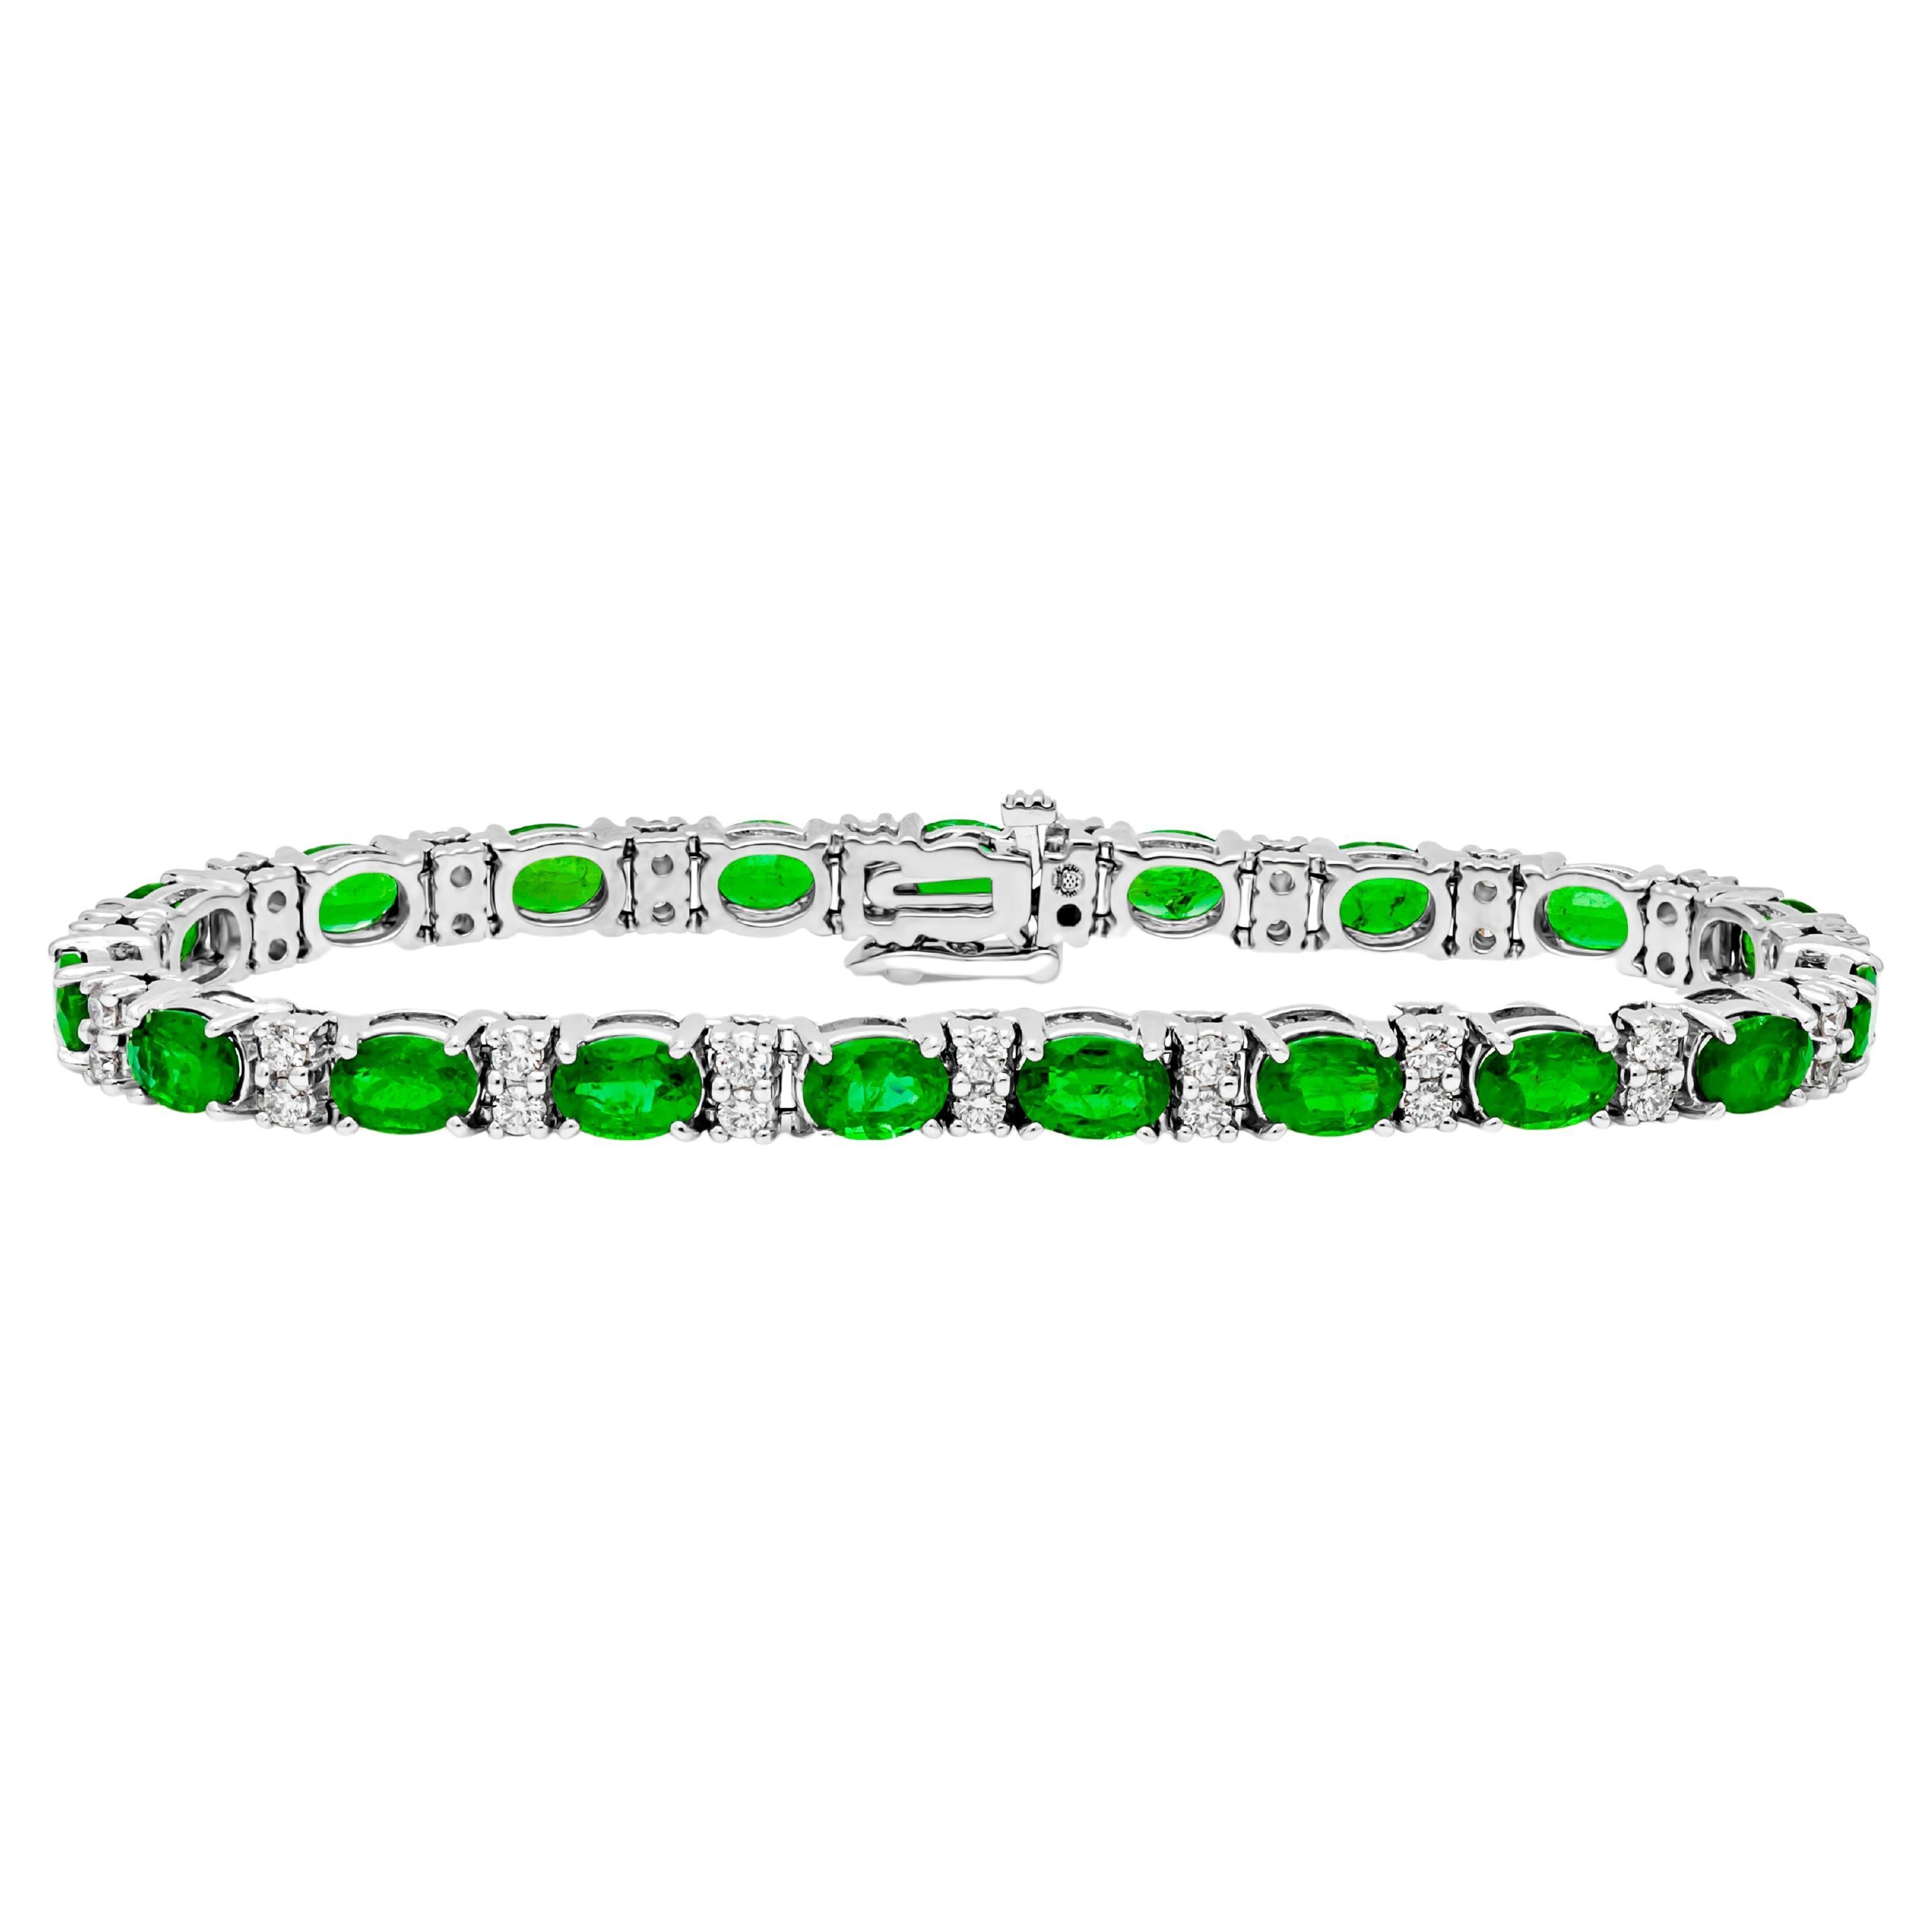 An exquisite and simple tennis bracelet, showcasing color-rich oval cut green emeralds weighing 8.48 carats total, set on a classic four prong basket setting finely made in 14K white gold. Evenly spaced by two melee round brilliant cut diamonds